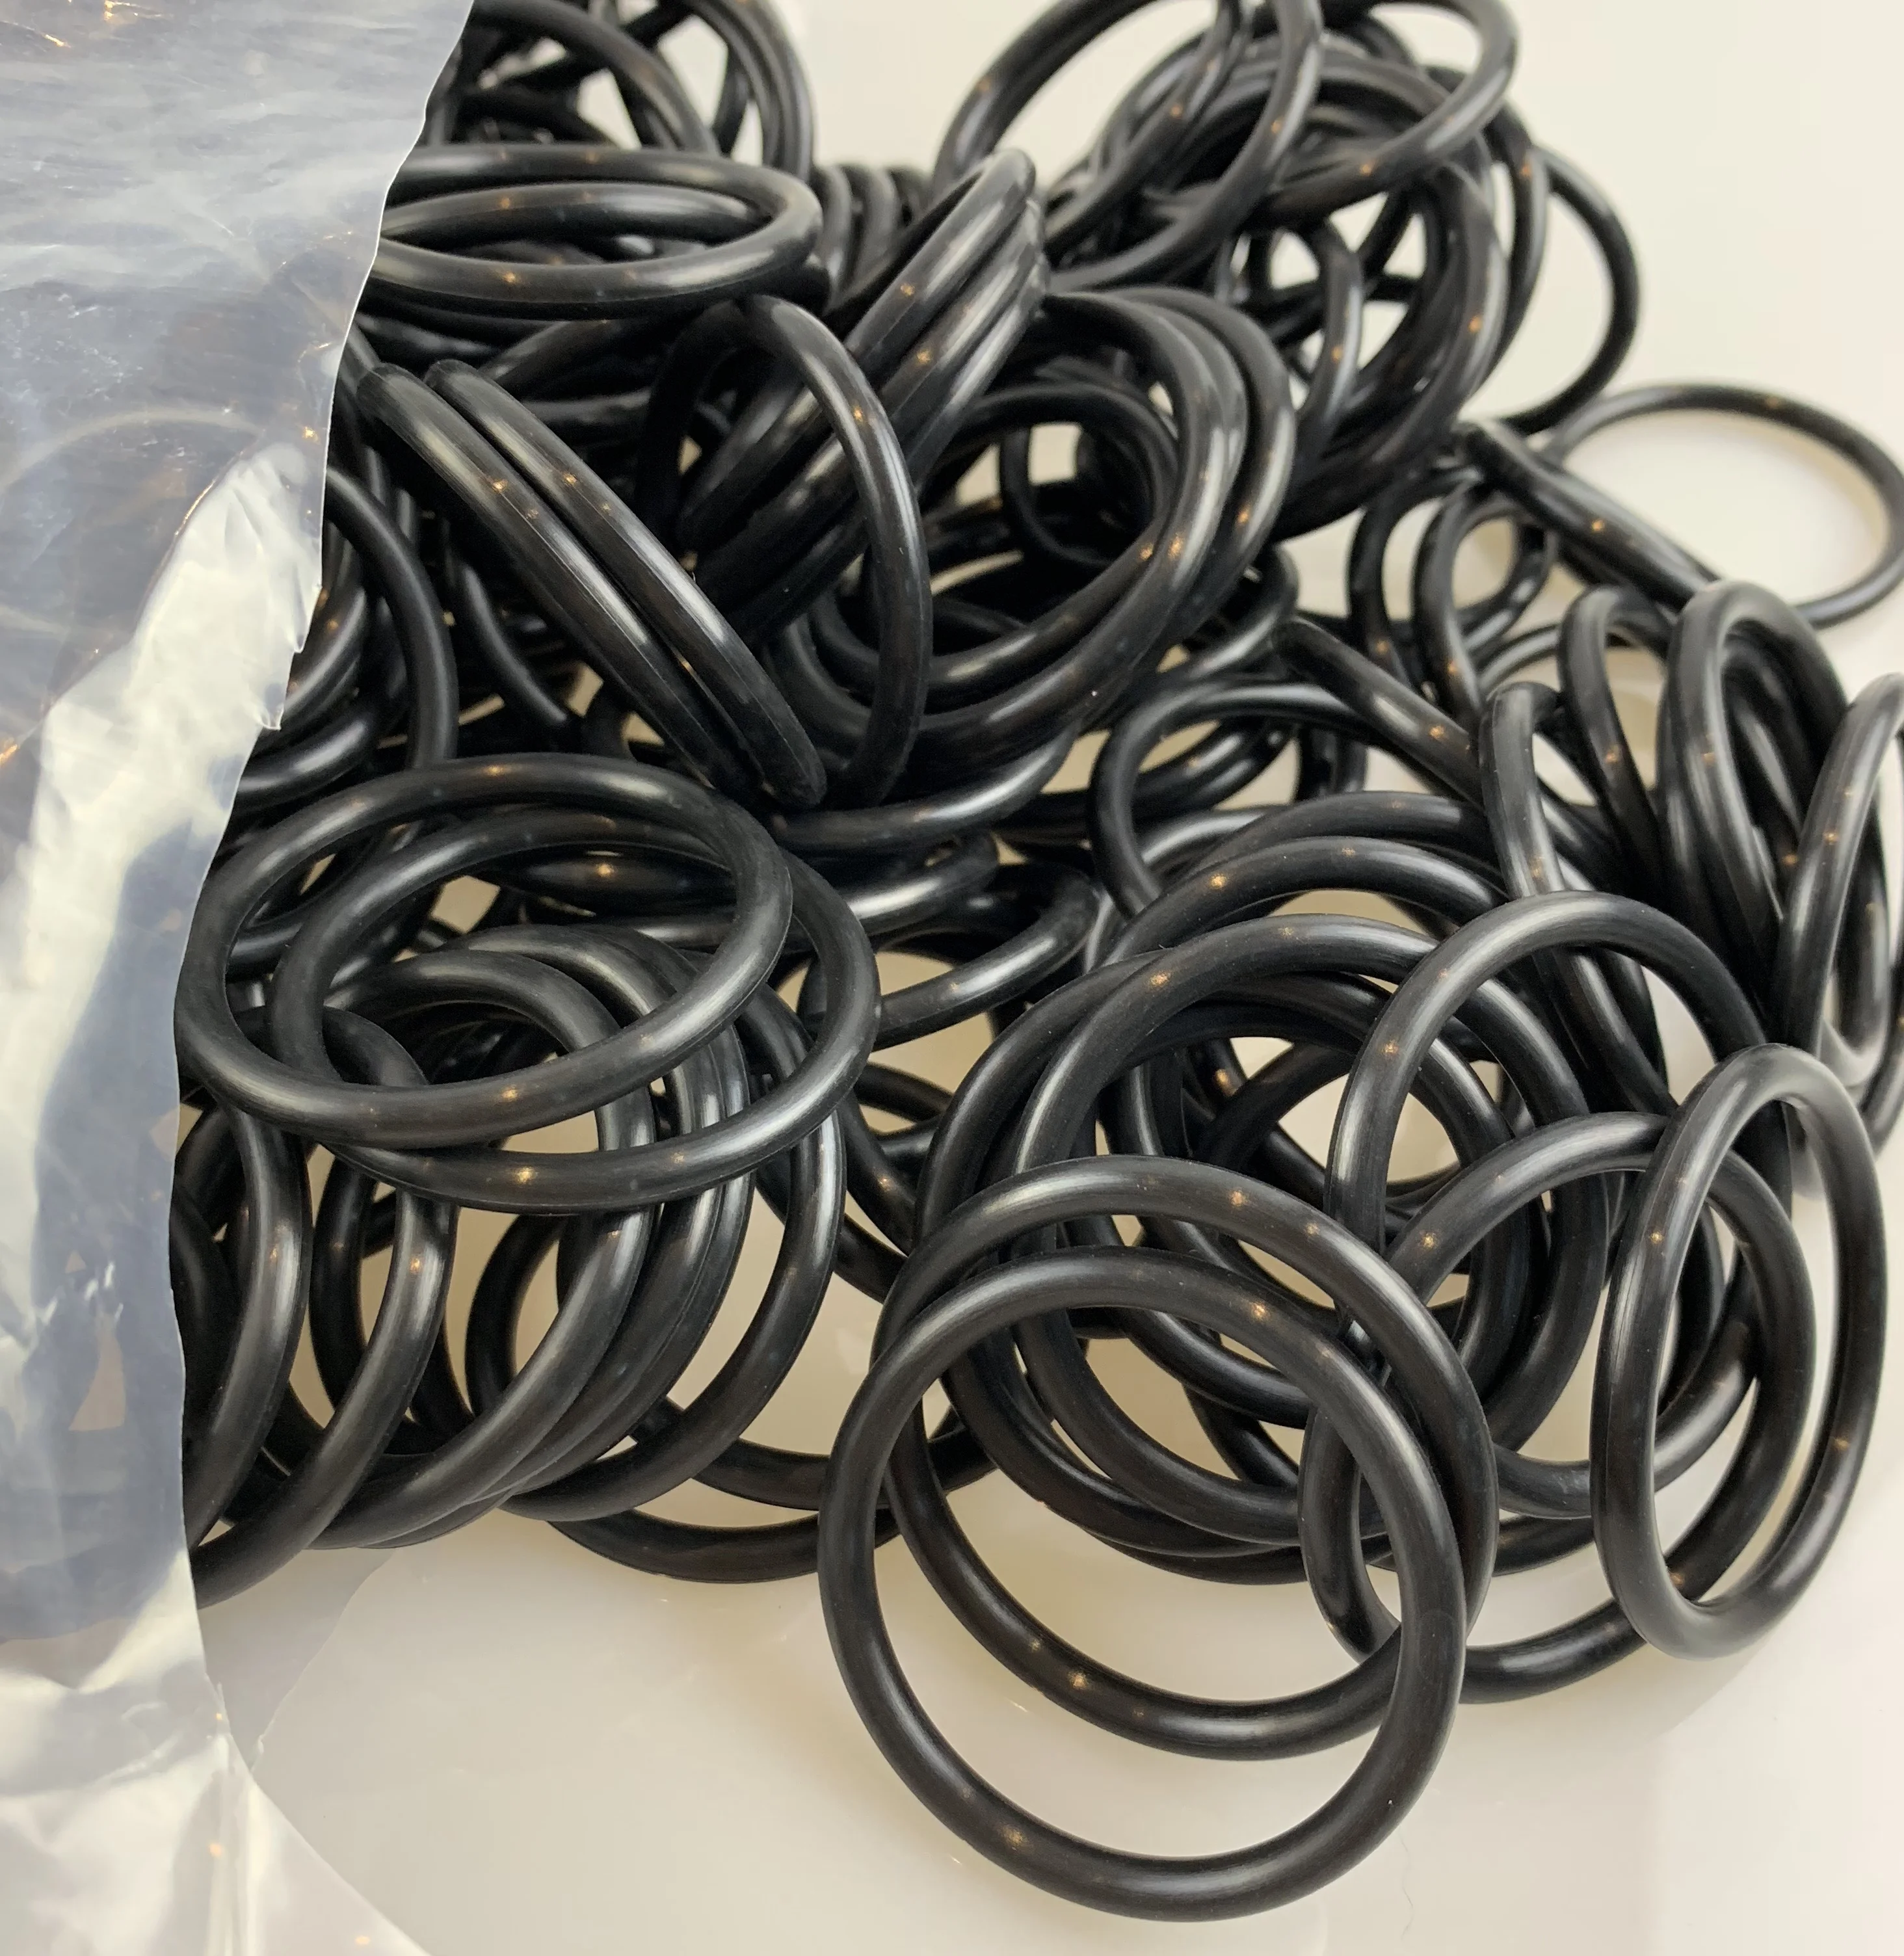 7.5 8 8.4 9.2mm Silicone Rubber O Rings Nr Cr Nbr Epdm Nbr Nbr Rubber ...